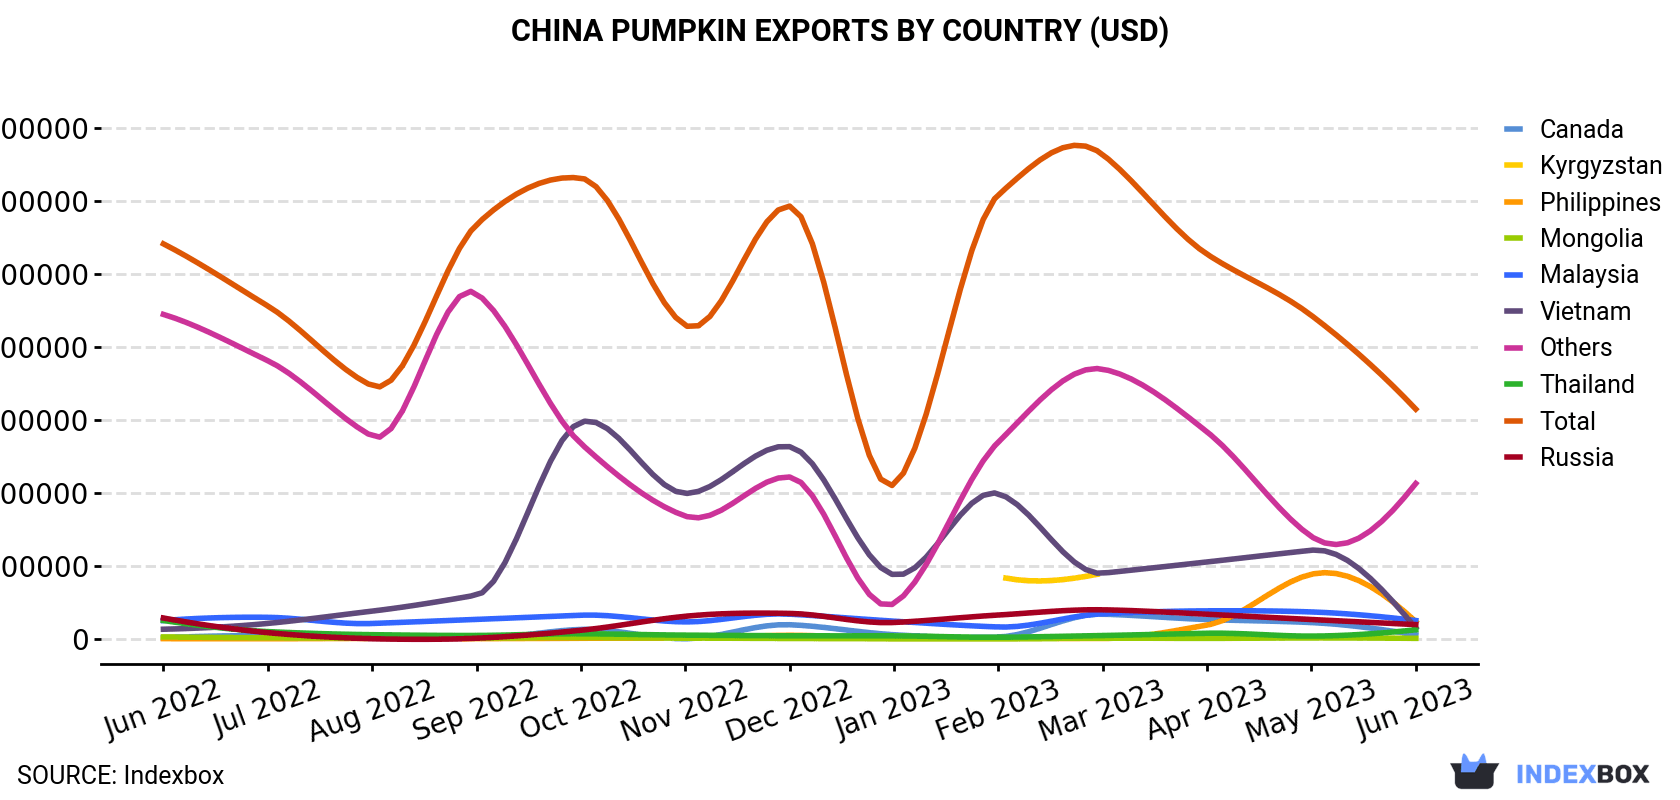 China Pumpkin Exports By Country (USD)